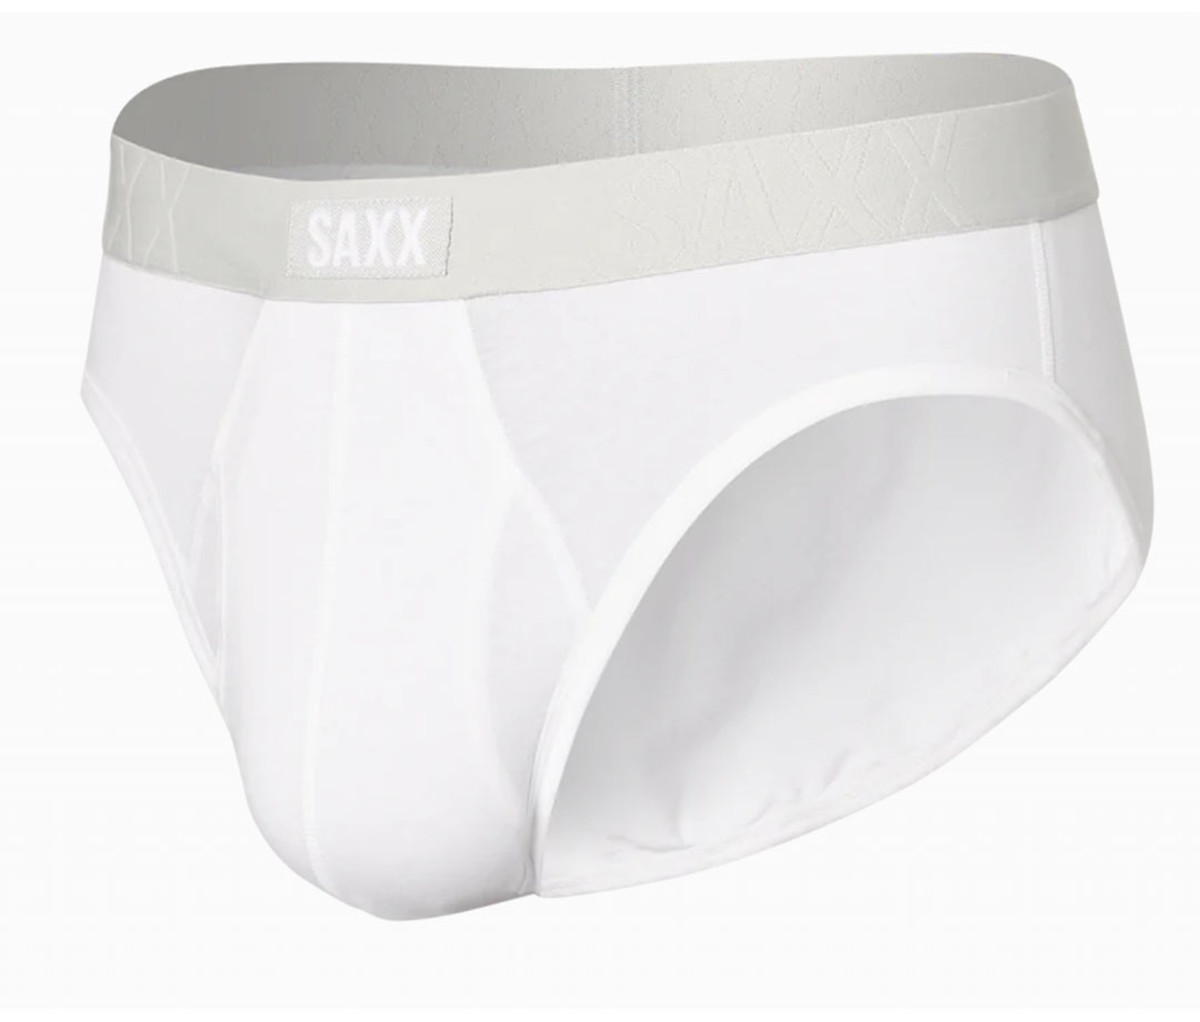 Summer Sale! Get 50% Off Select Styles at SAXX! - Men's Journal